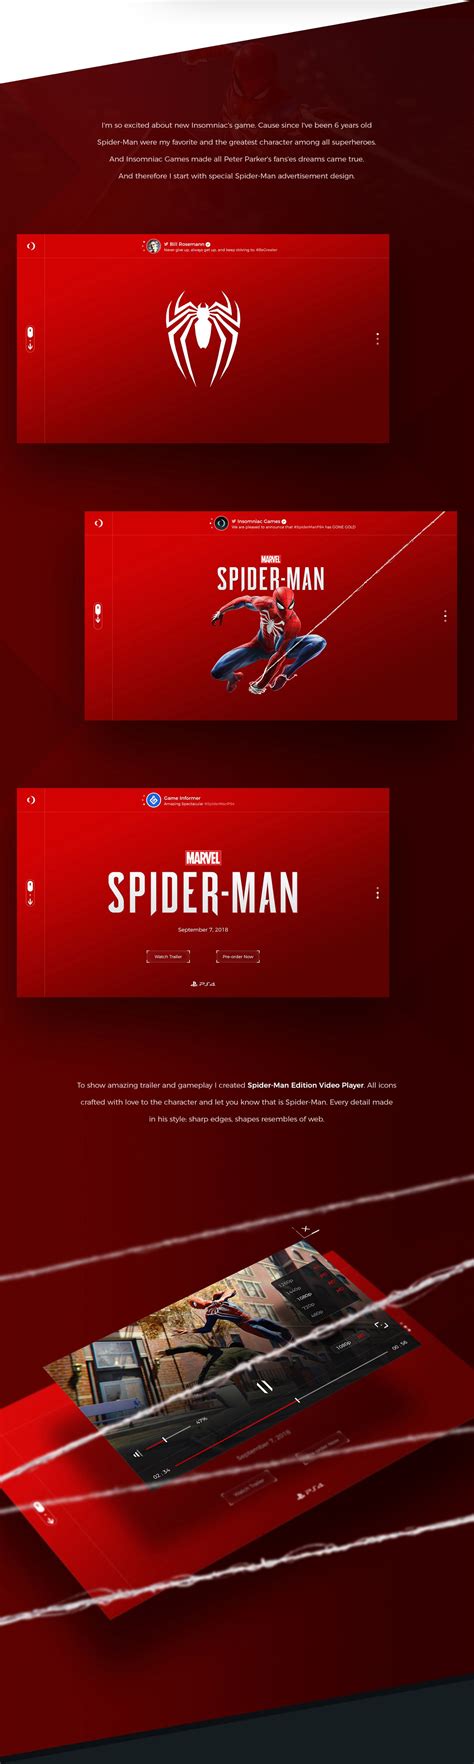 insomniac-games-redesign-concept-on-behance-redesign